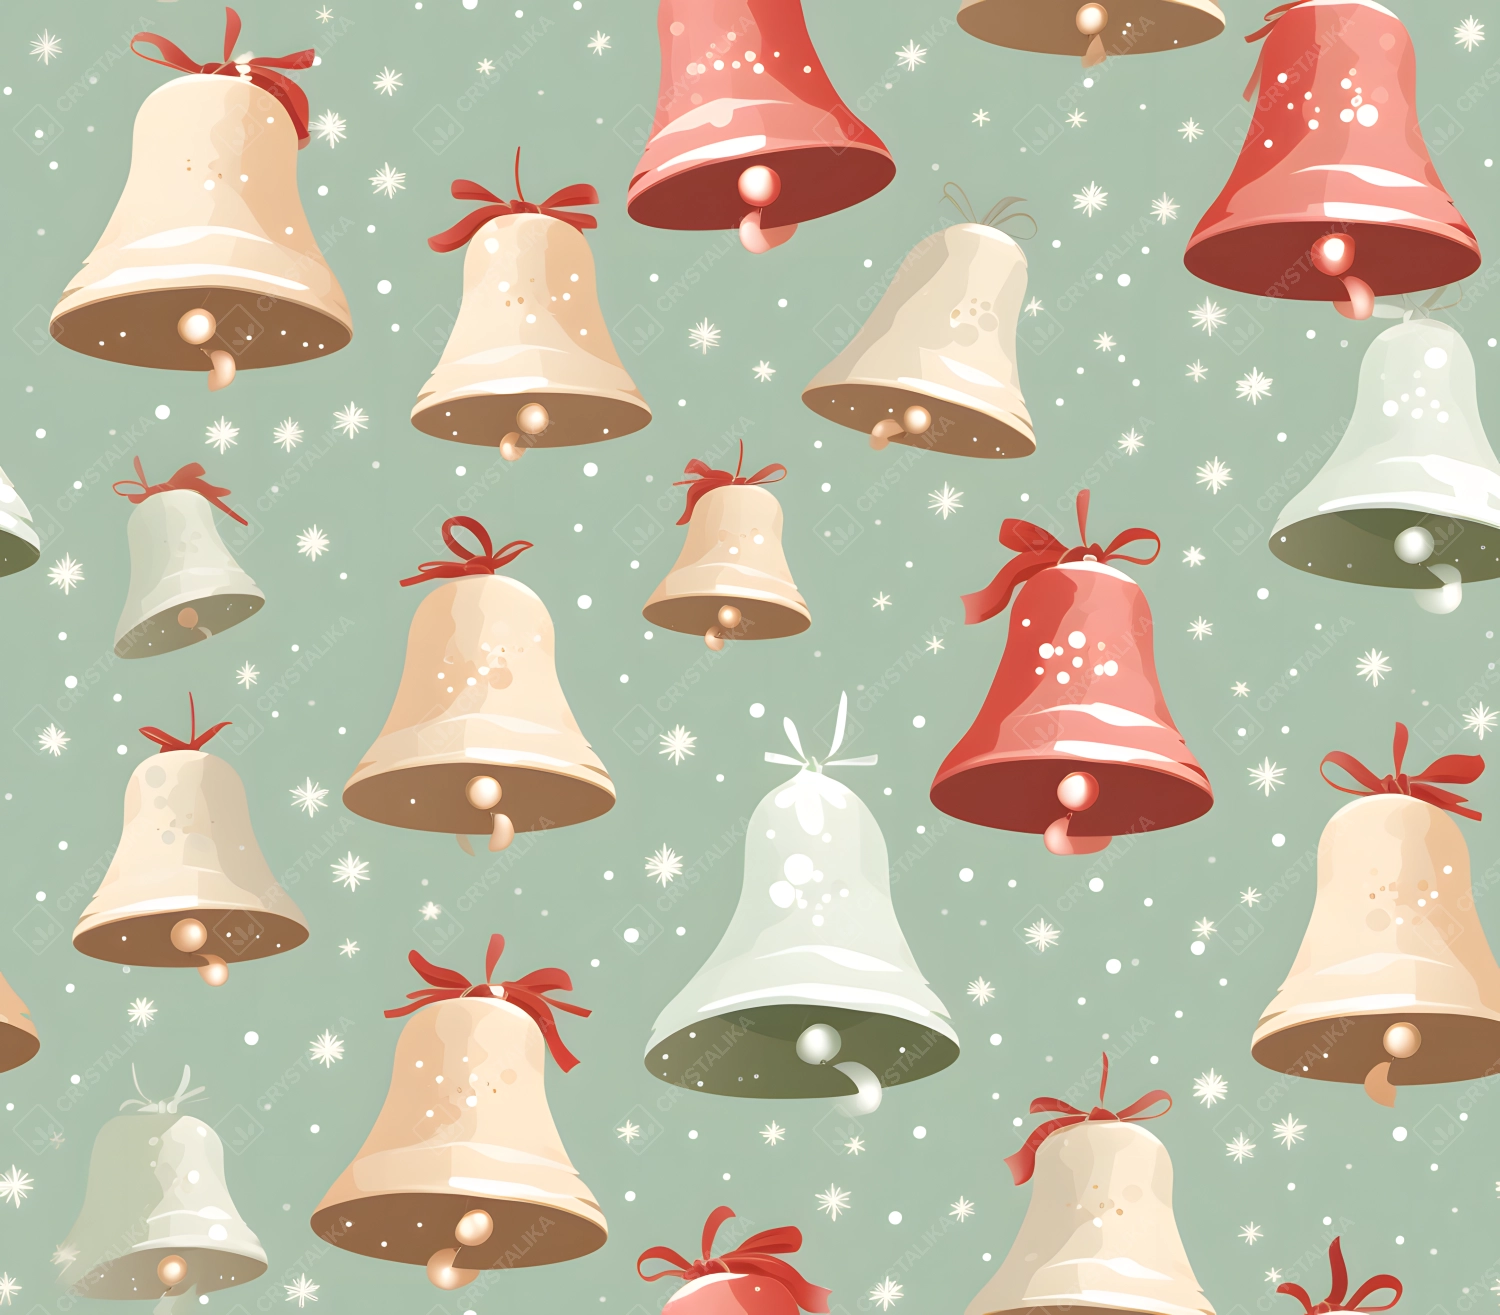 Festive Harmony of Red and Green Christmas Bell with White Snowflakes